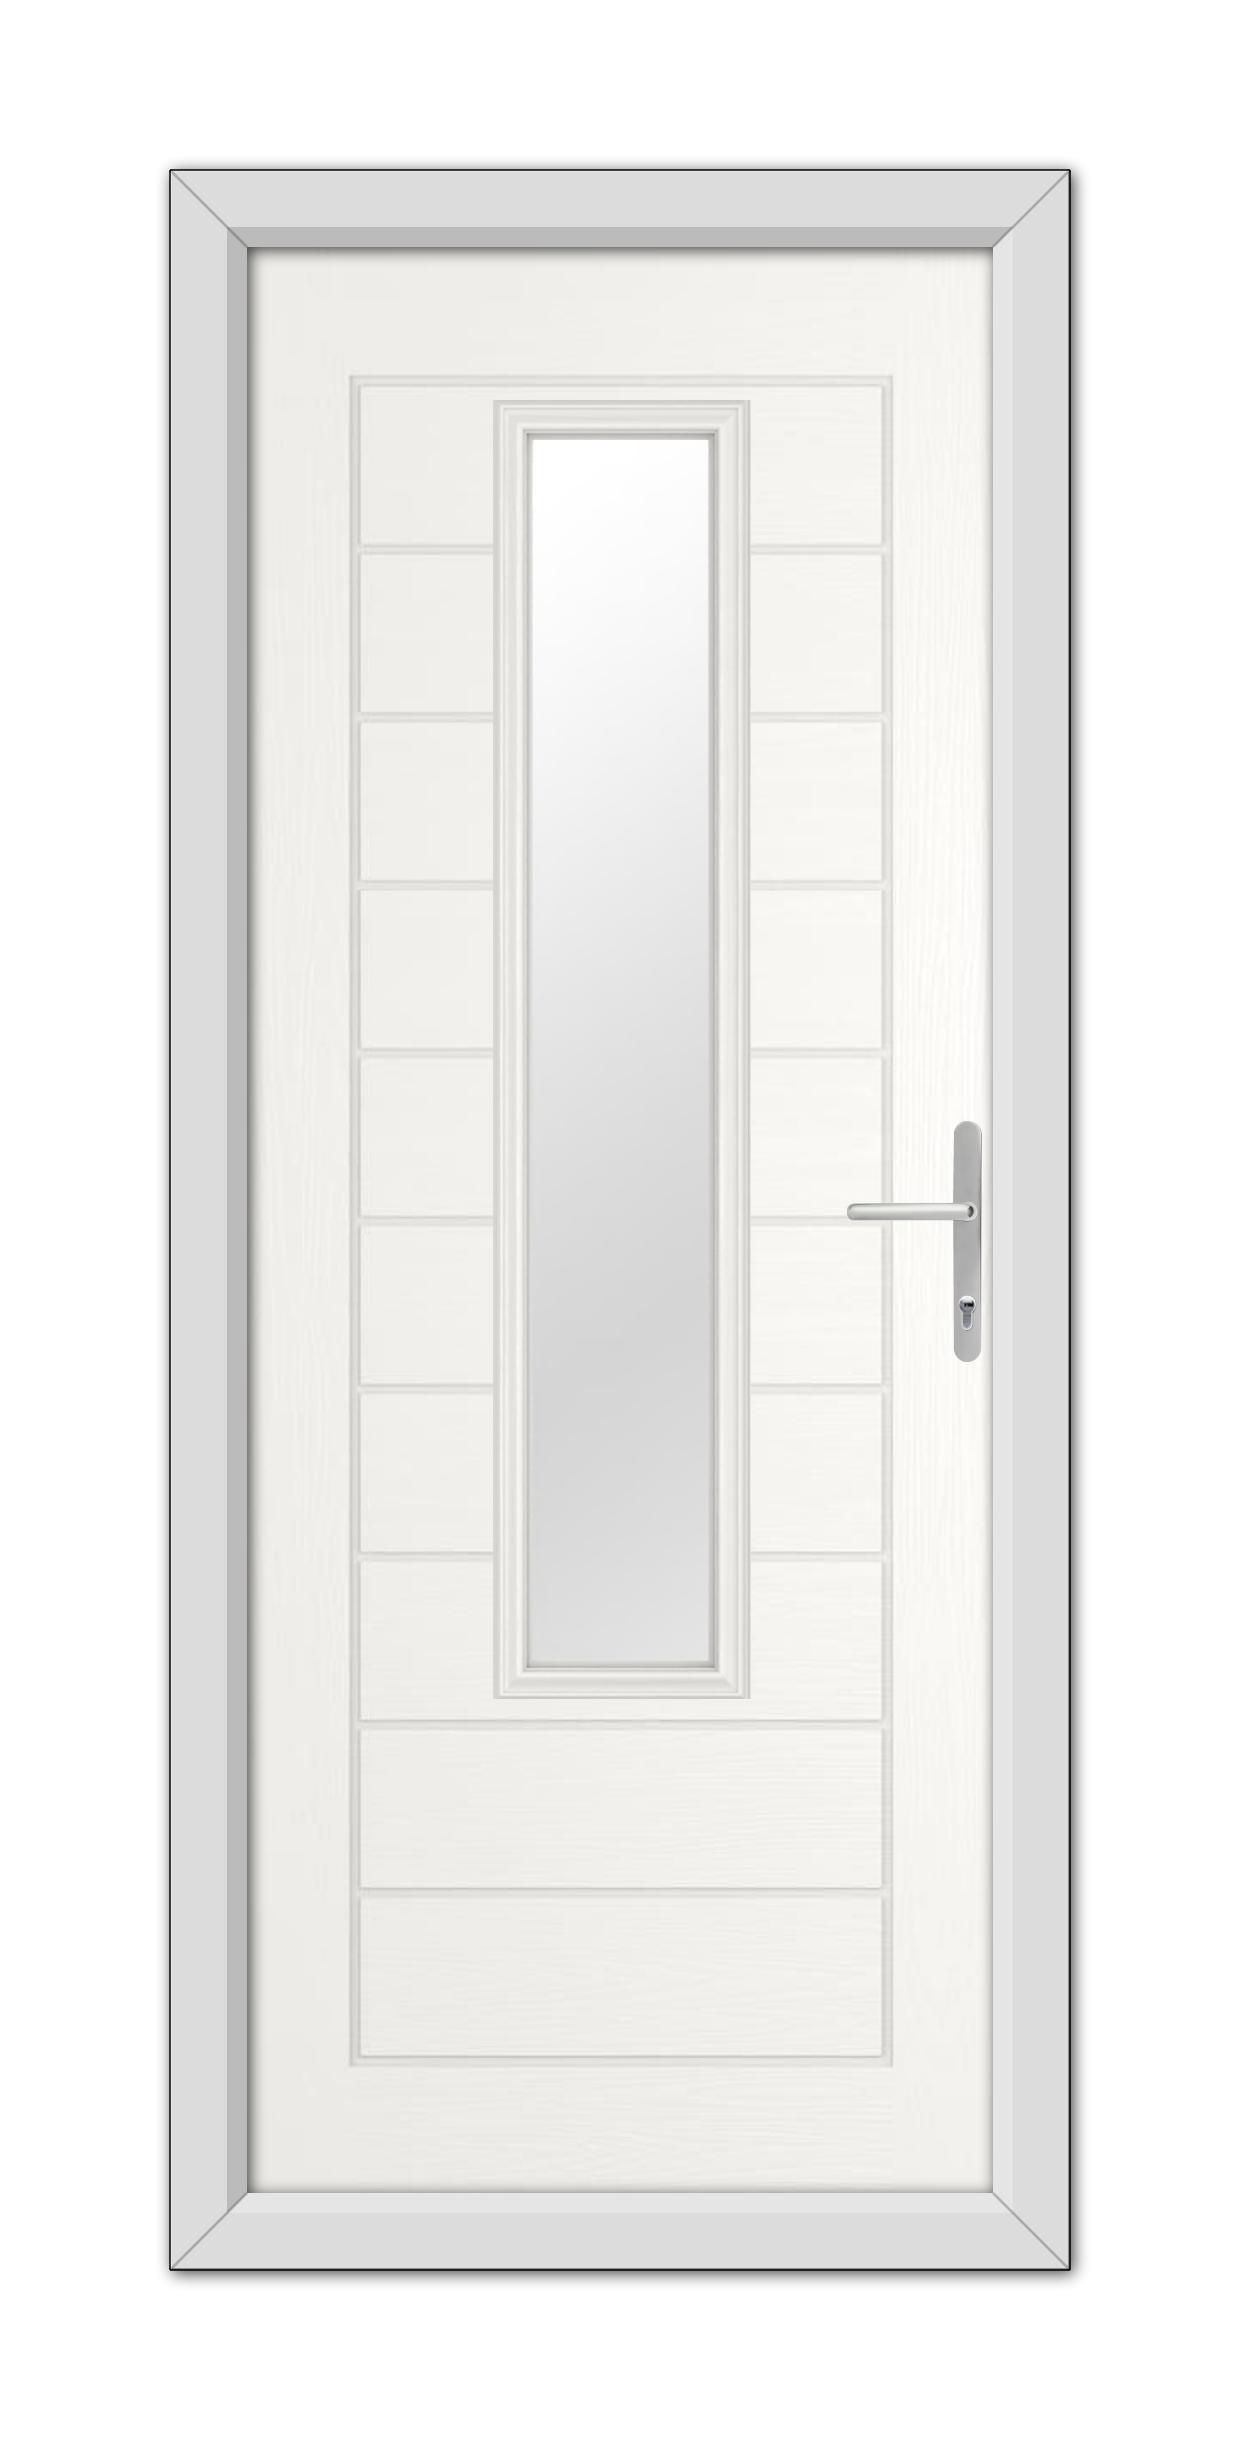 A White Bedford Composite Door 48mm Timber Core with a vertical rectangular glass panel and a metallic handle, surrounded by a simple frame.